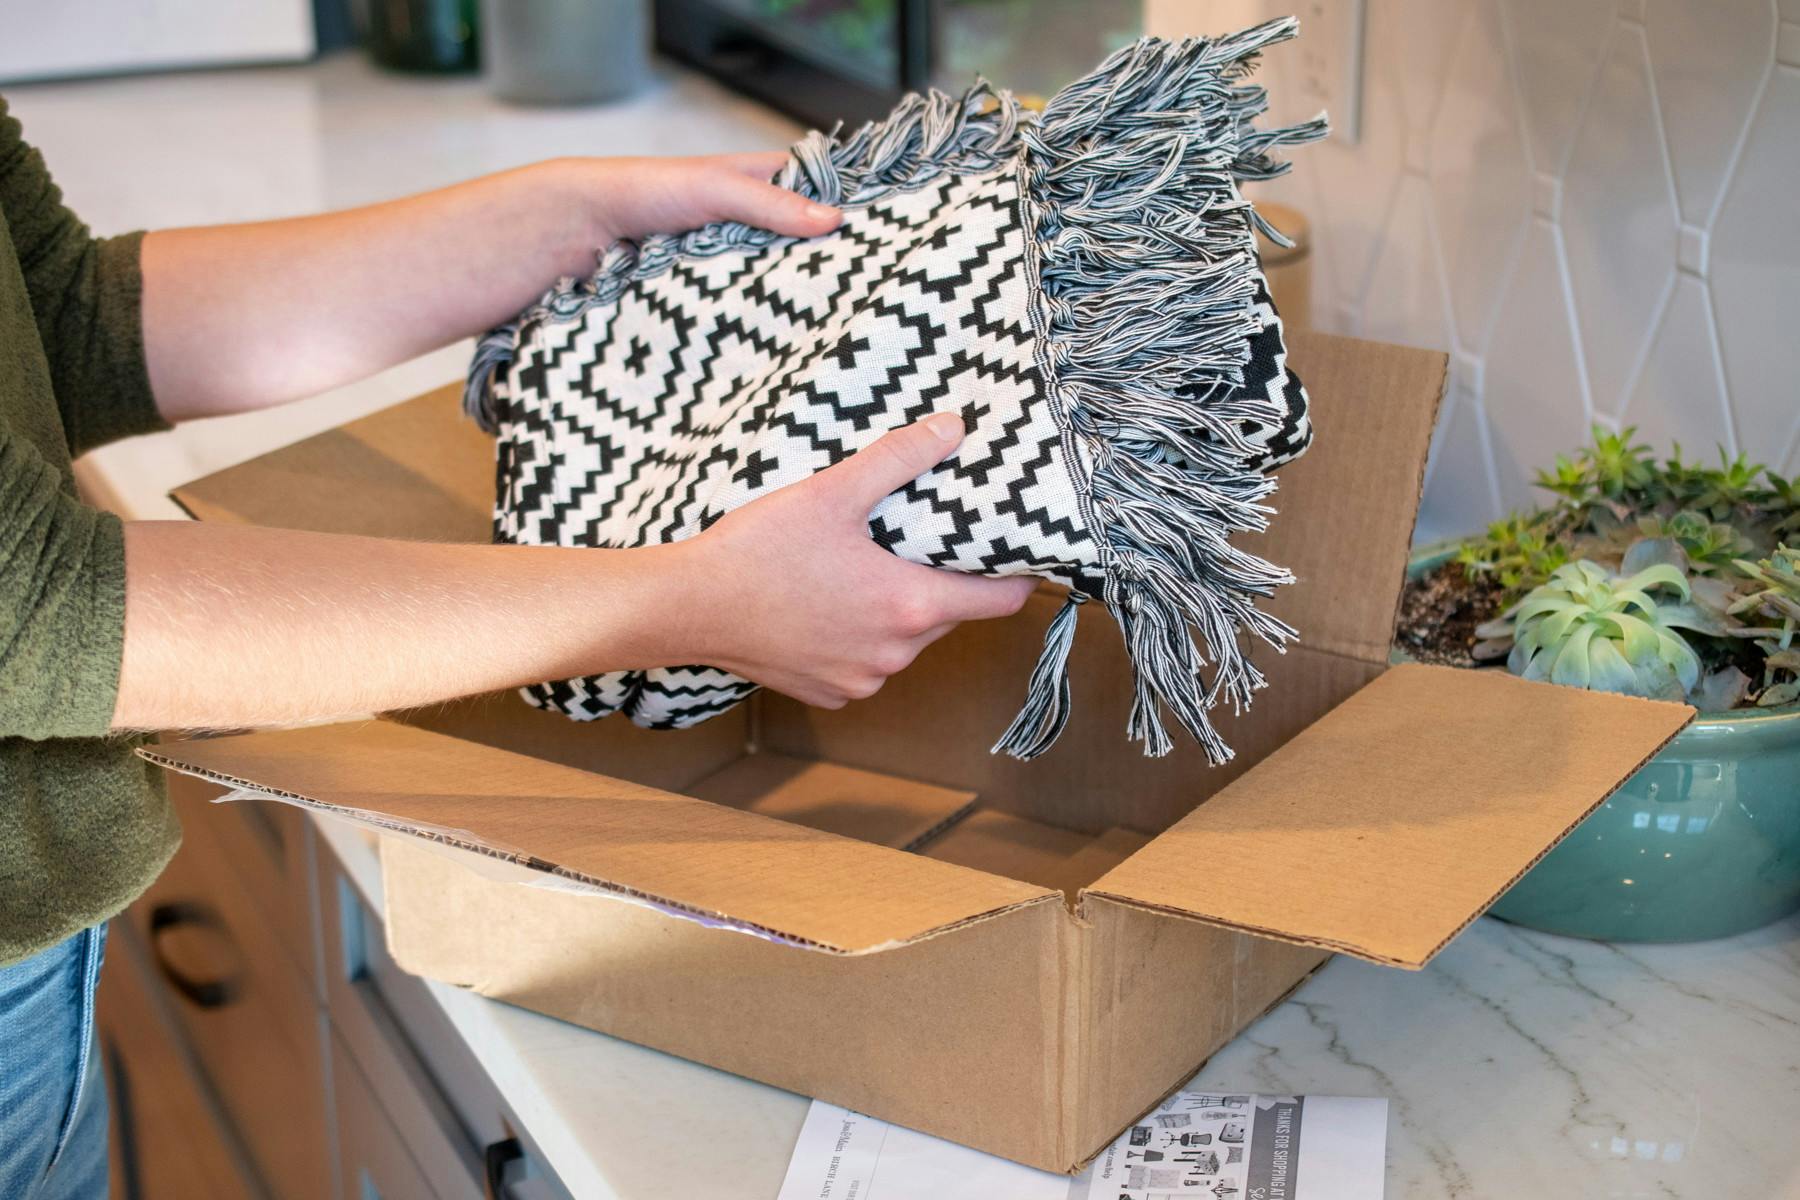 Person pulling a blanket out of a Wayfair box